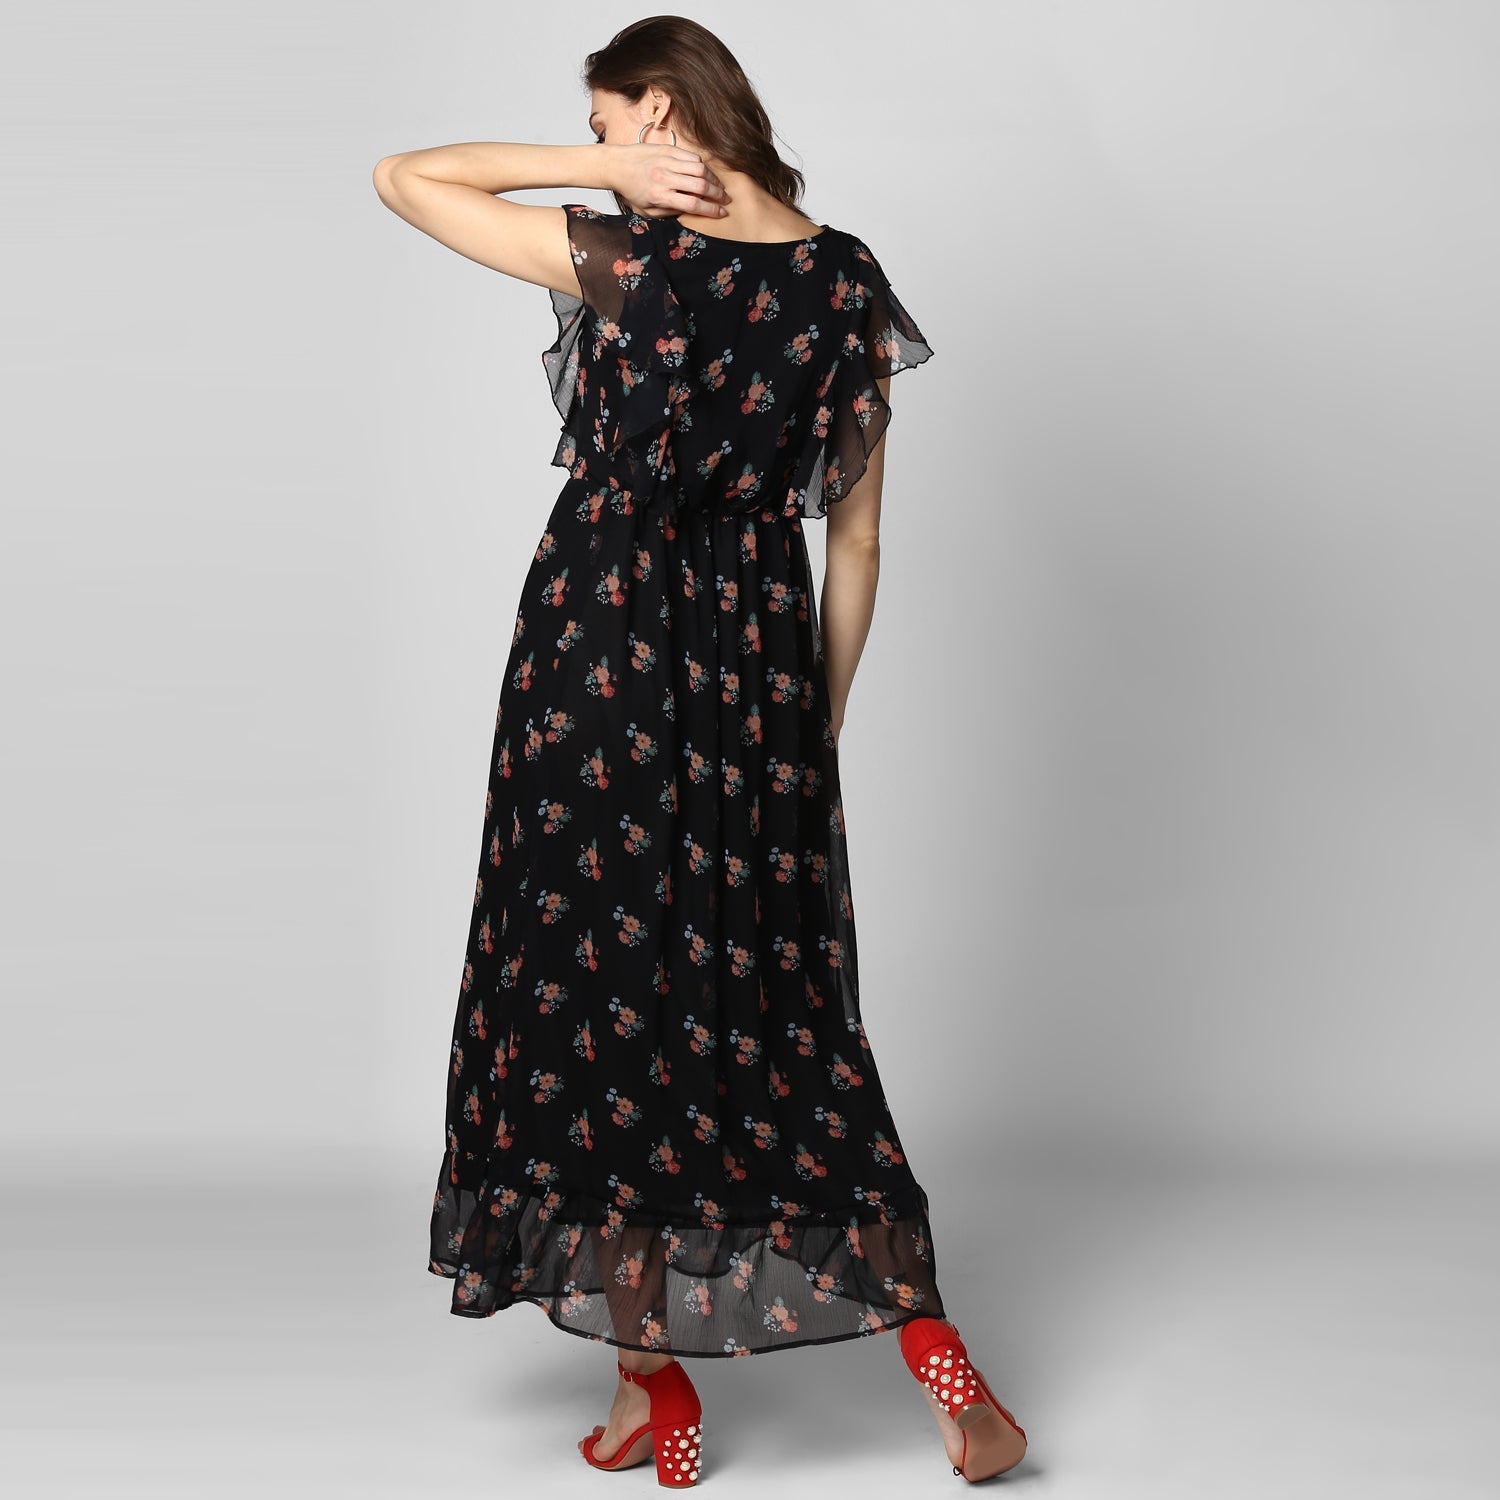 Women's Black Printed Maxi Dress with Lining - Final Clearance Sale